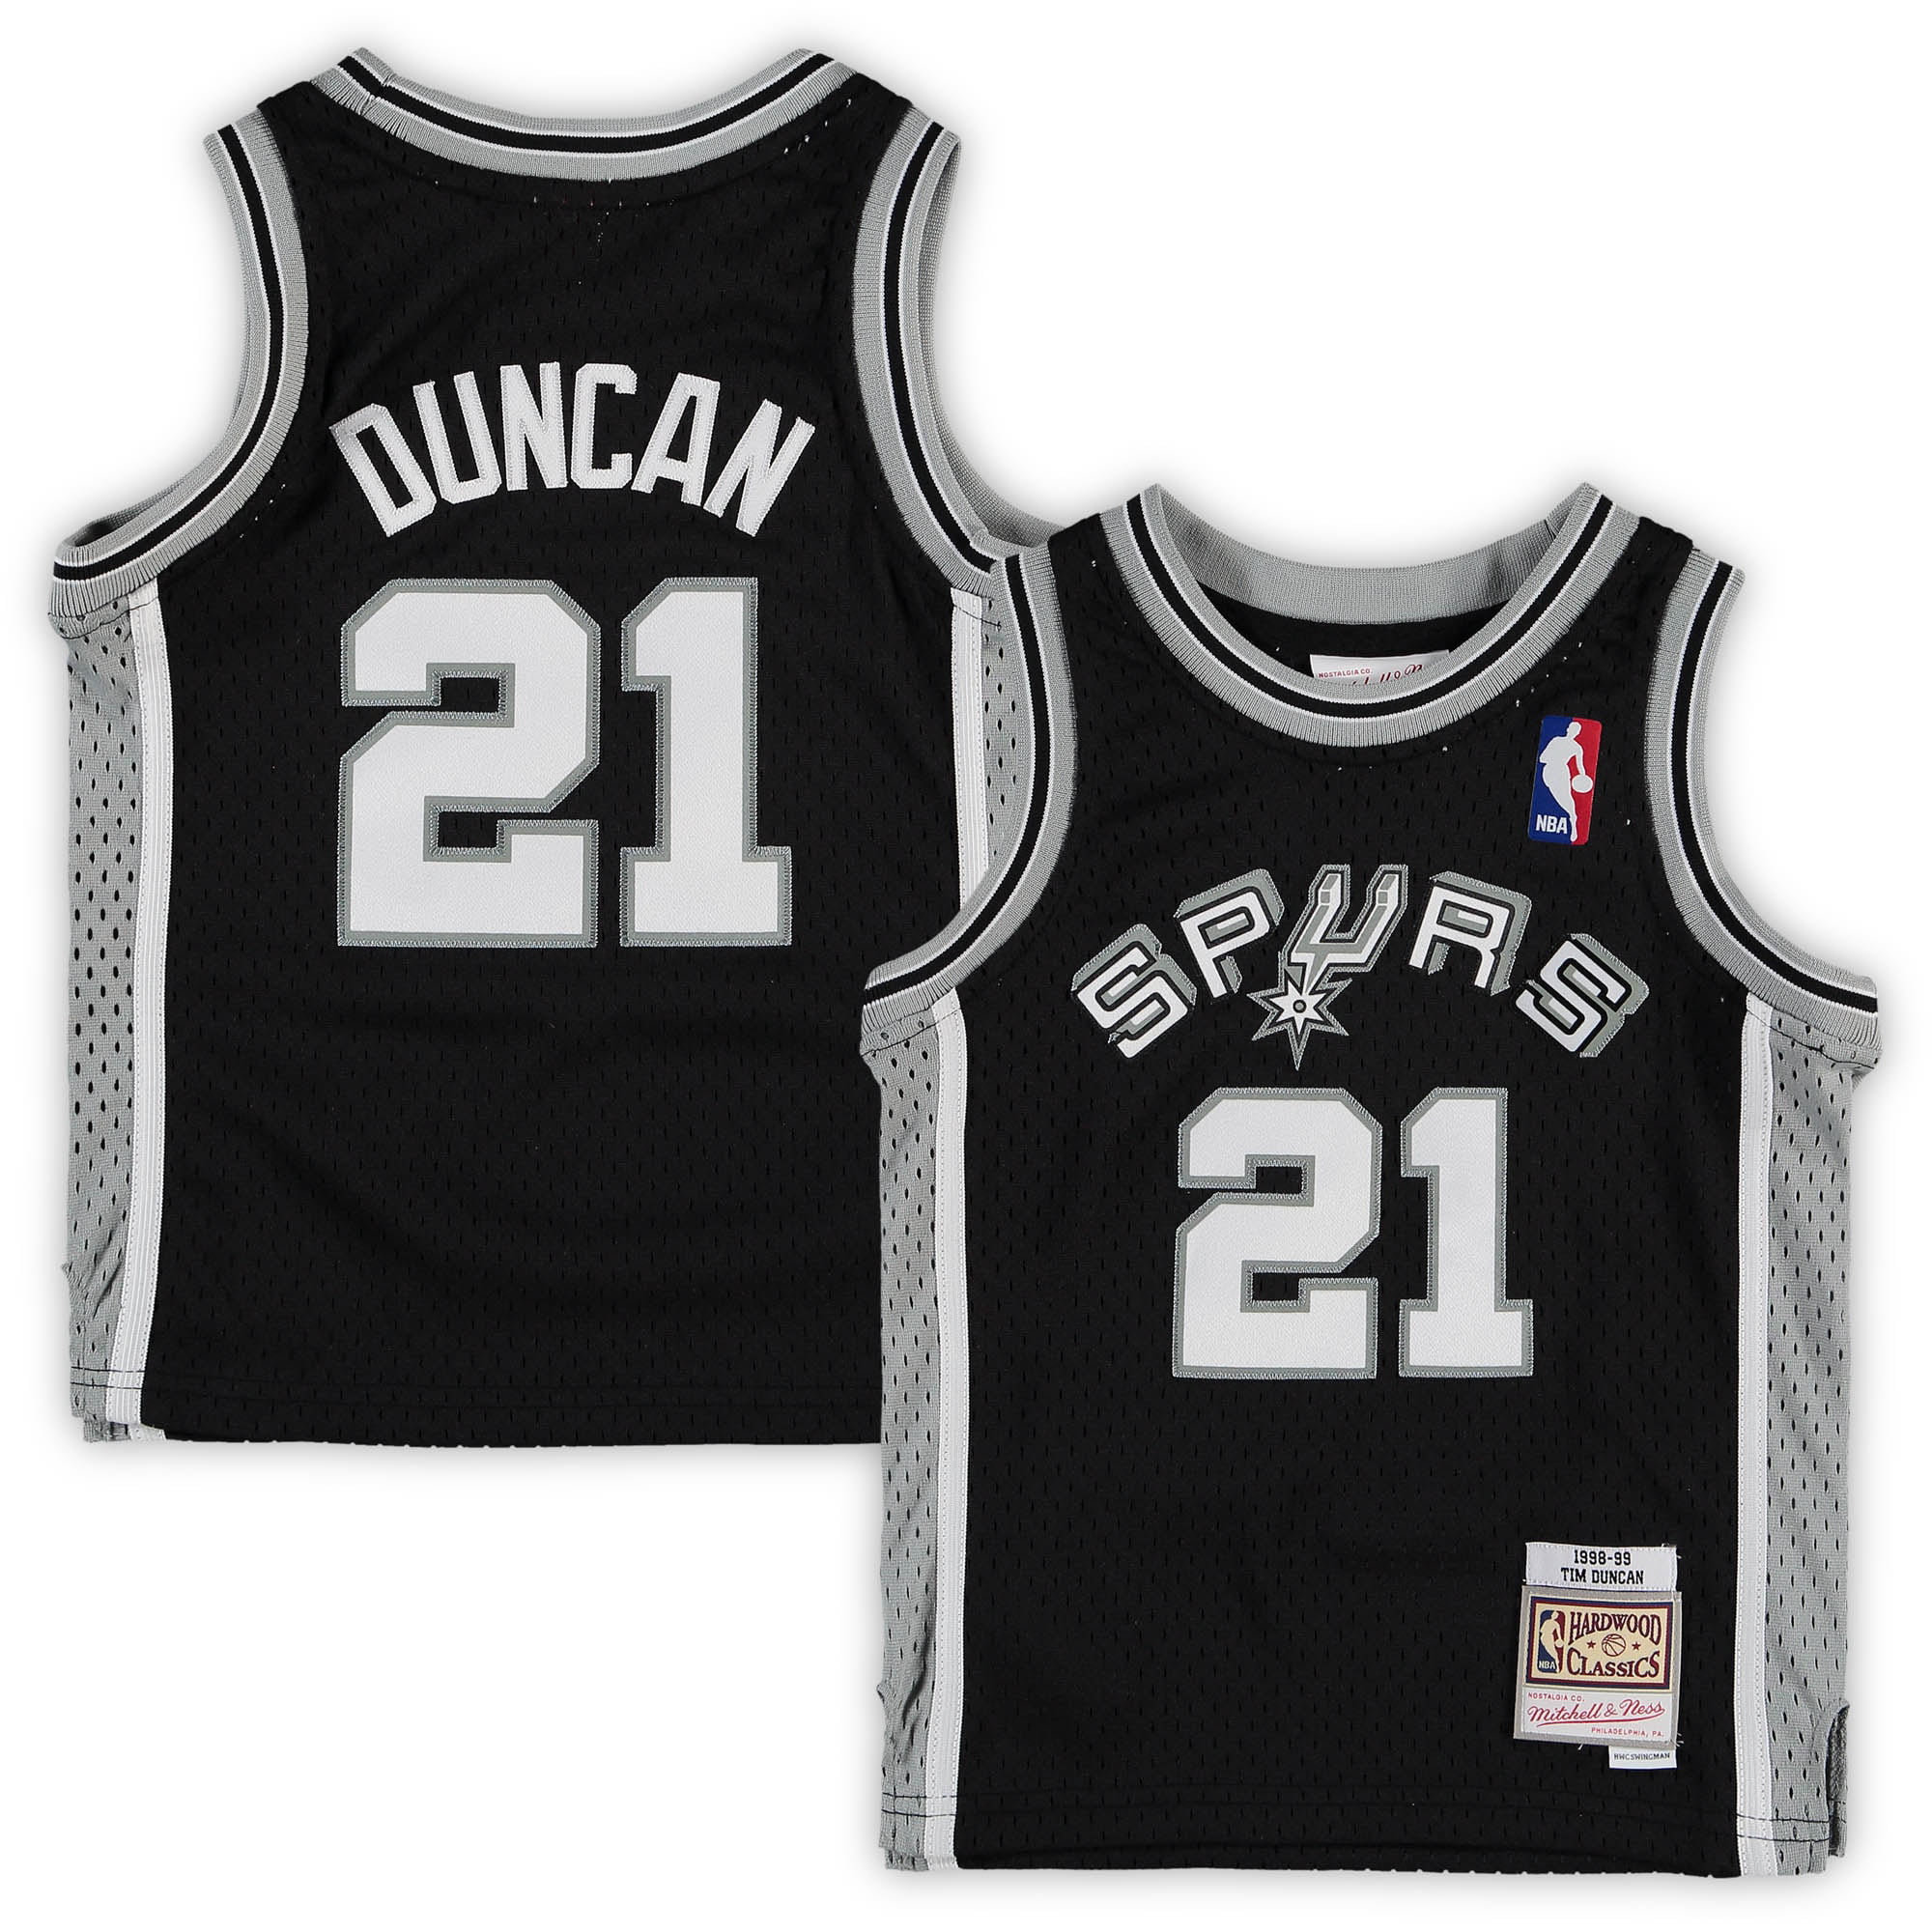 San Antonio Spurs Jersey MenS Sleeveless T-Shirt #10 for Basketball Fans Party And Outdoor Sports,Multi colored,S 